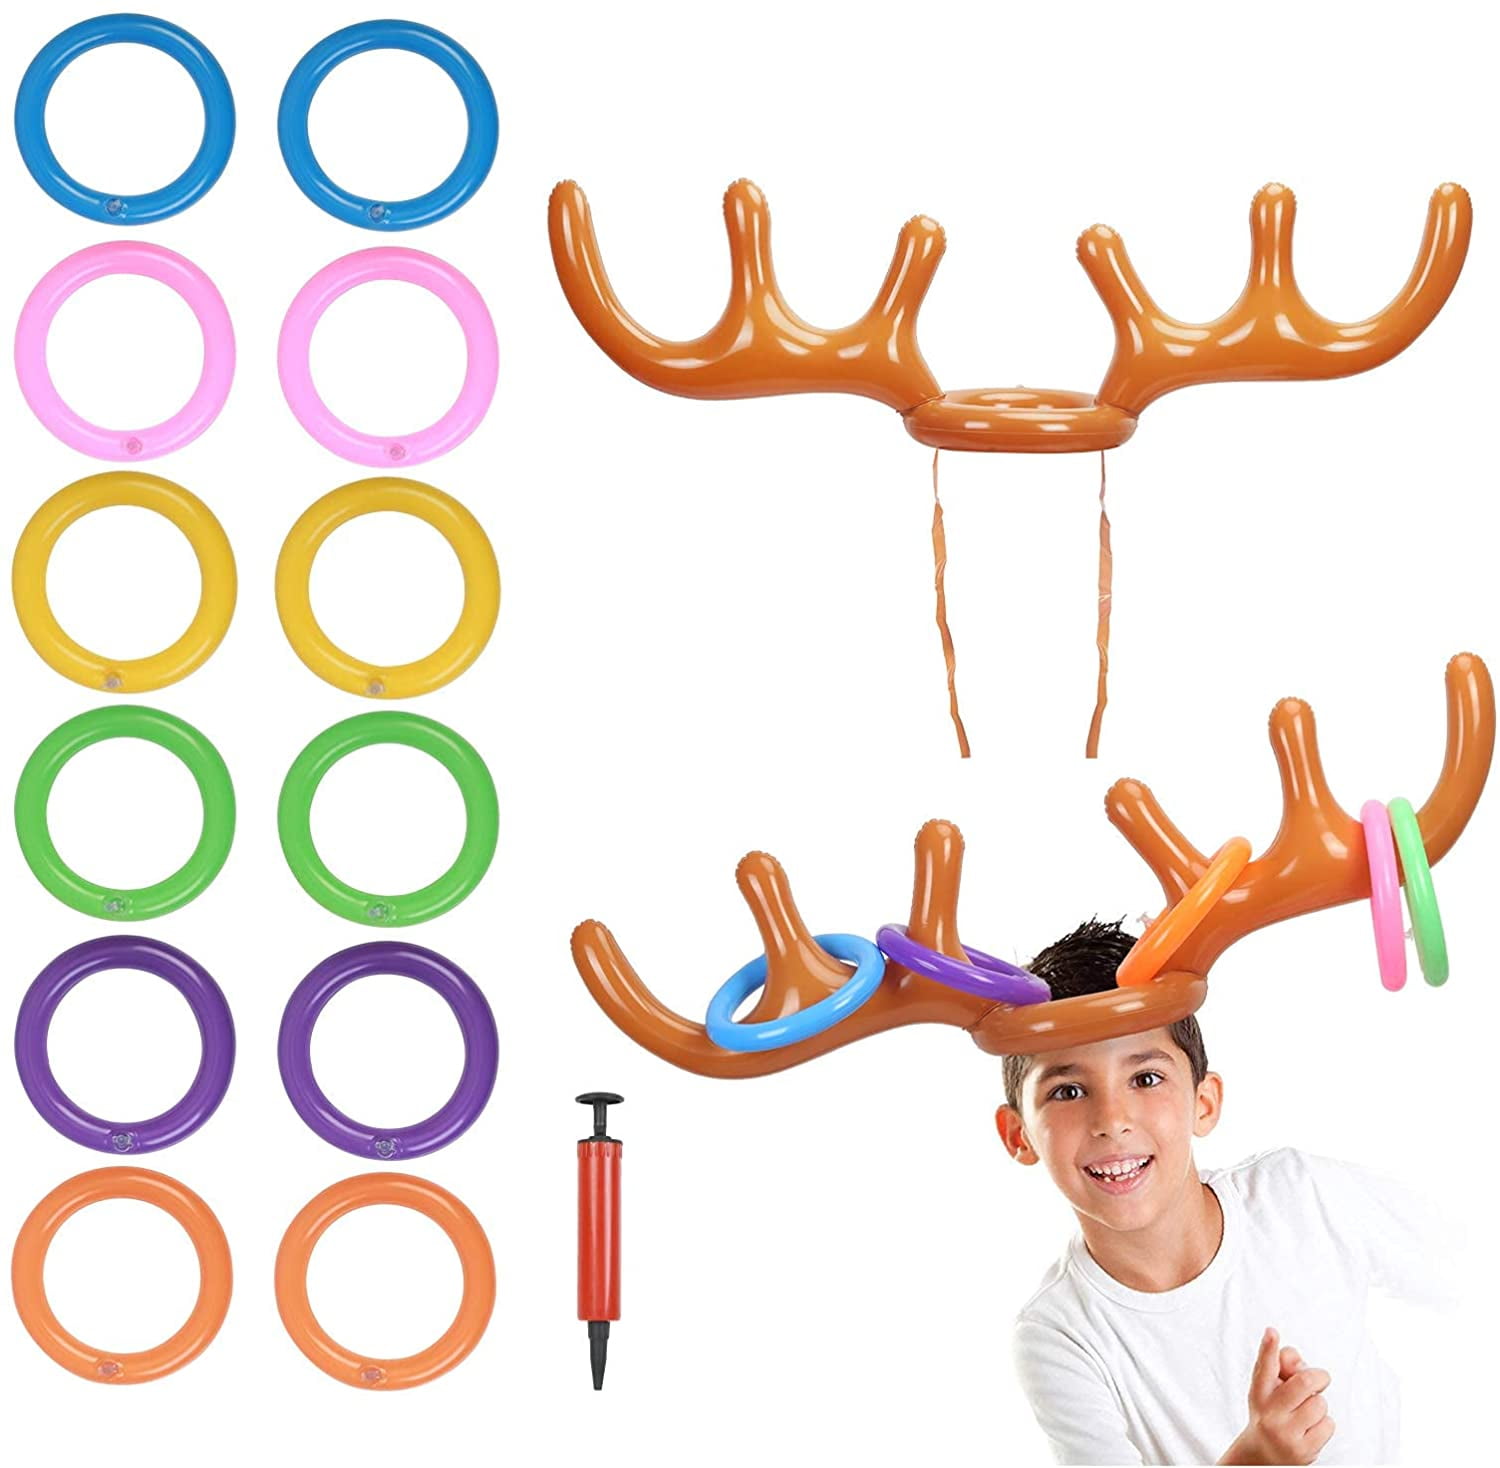 Inflatable Reindeer Antler Game BESTZY 2 Set Toss Game Set for Kids Adult Christmas Party Game Headband Inflatable Toys for Indoor Outdoor Game Xmas Holiday Party Supplies Carnival Game